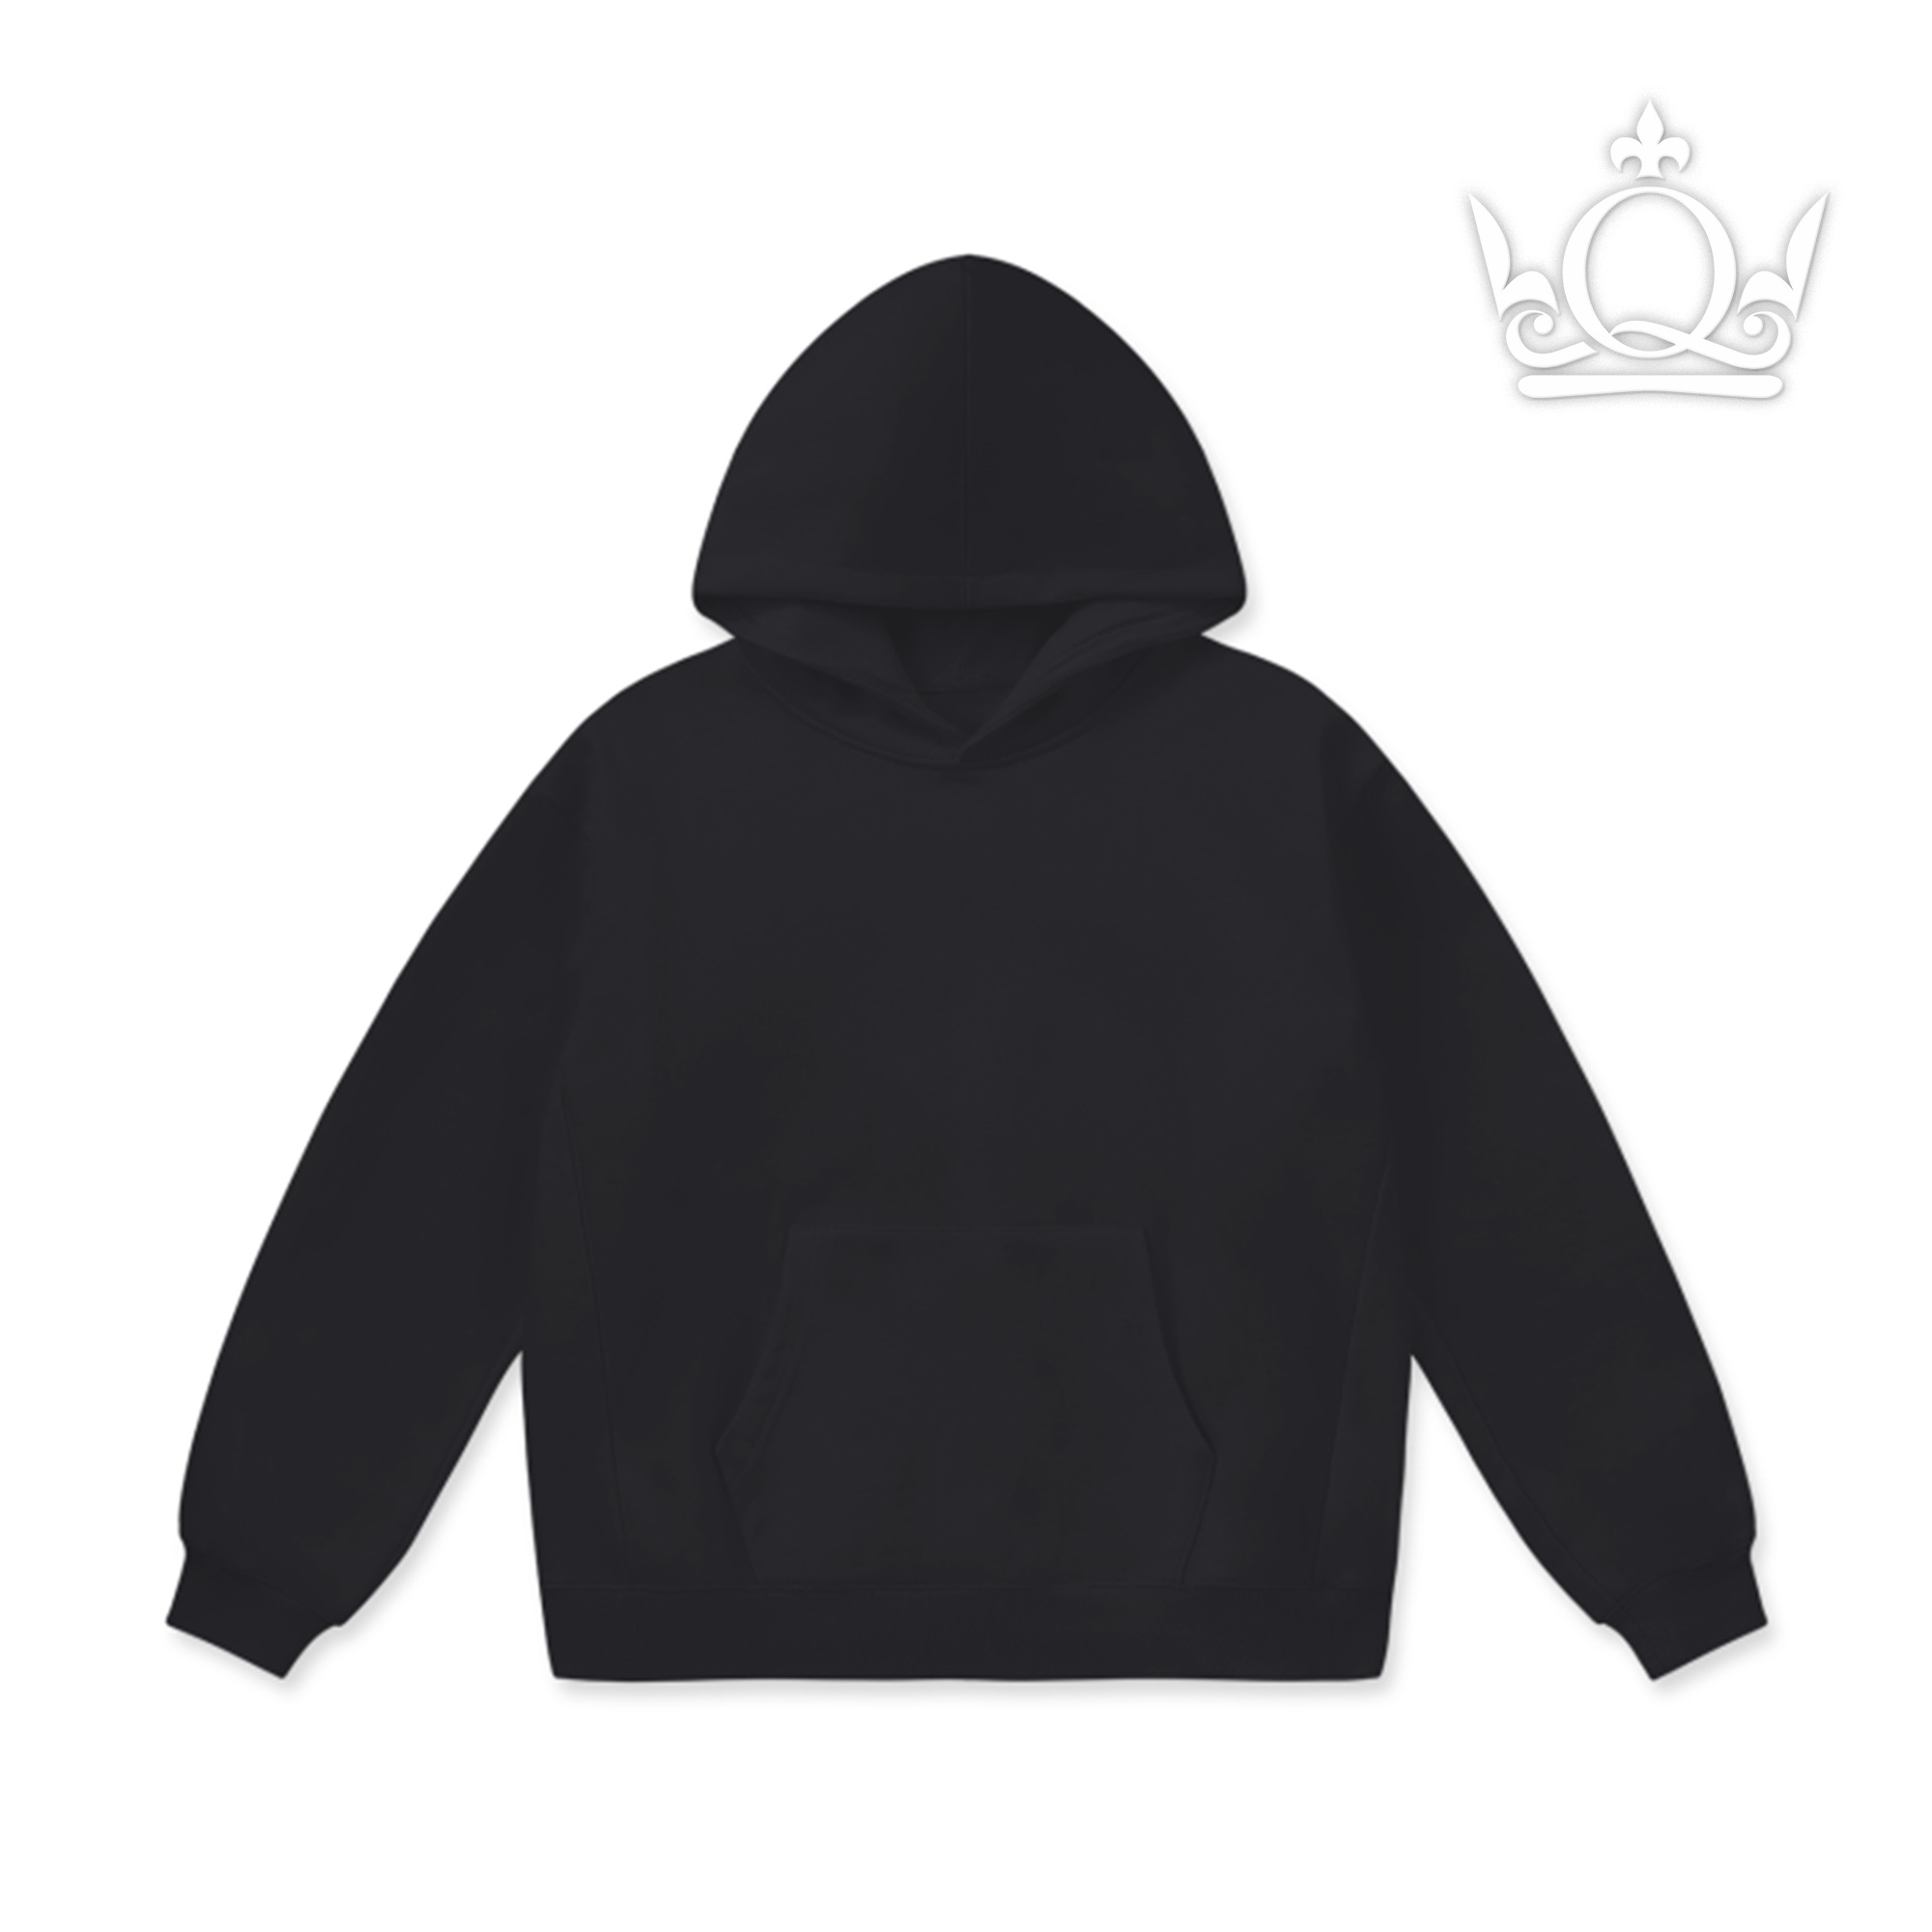 LCC Super Weighted Hoodie - Queen Mary University of London (Classic Ver.1)